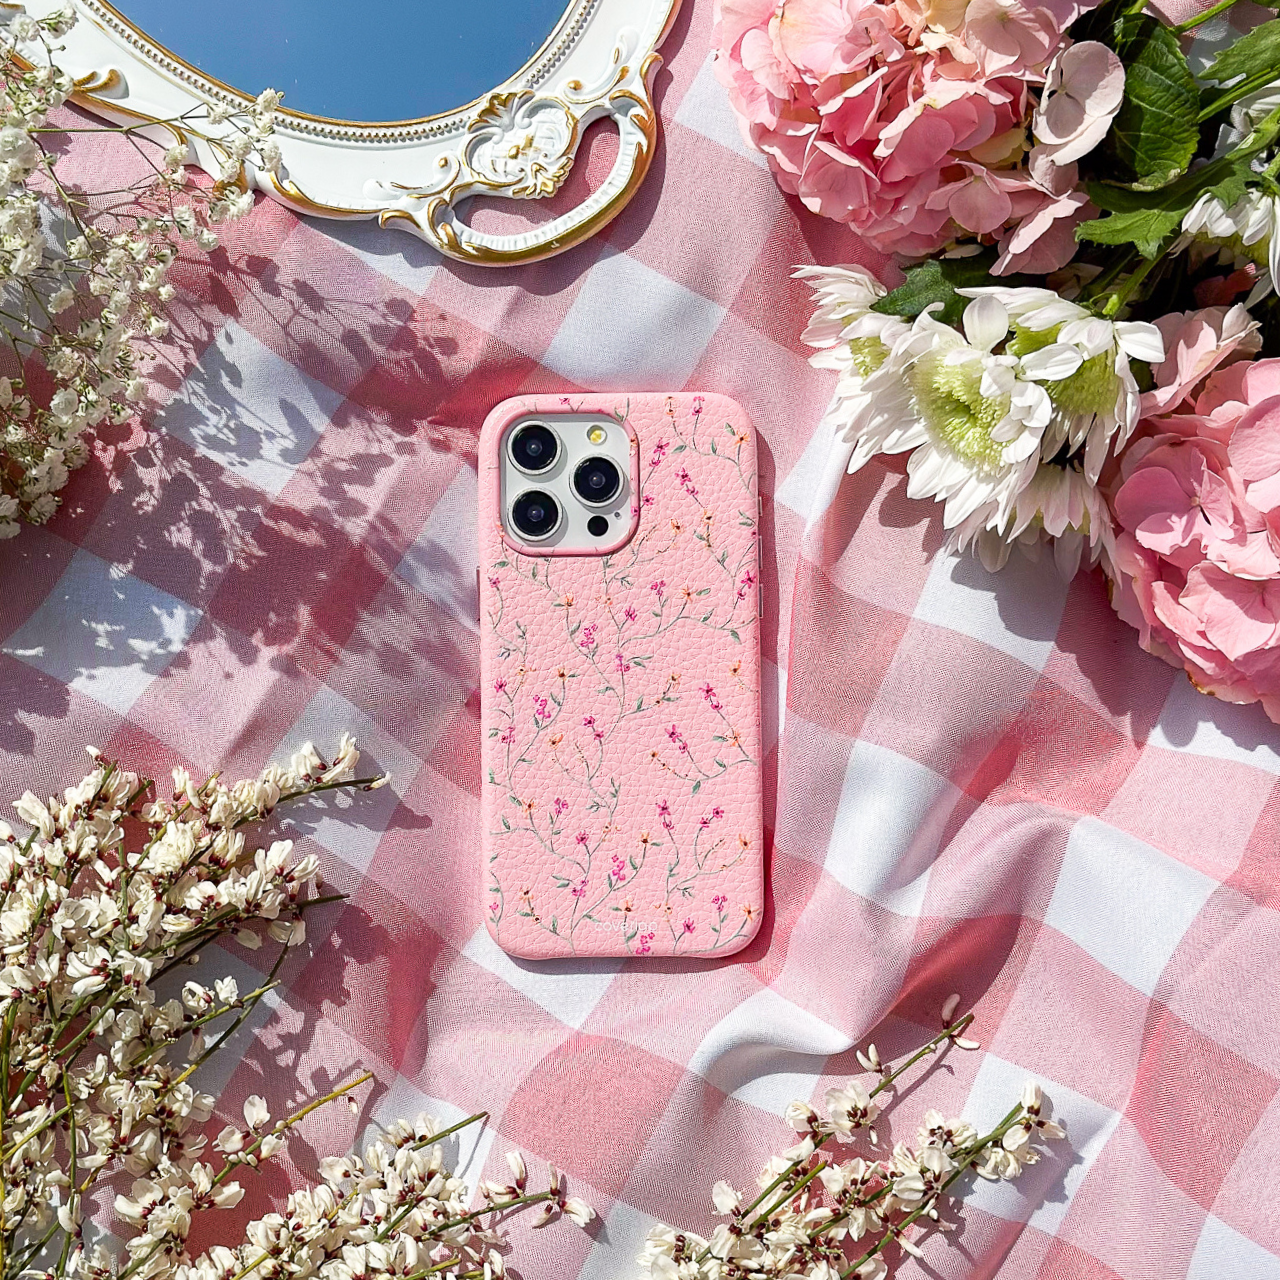 Girls Flowers Personalised Leather iPhone Case